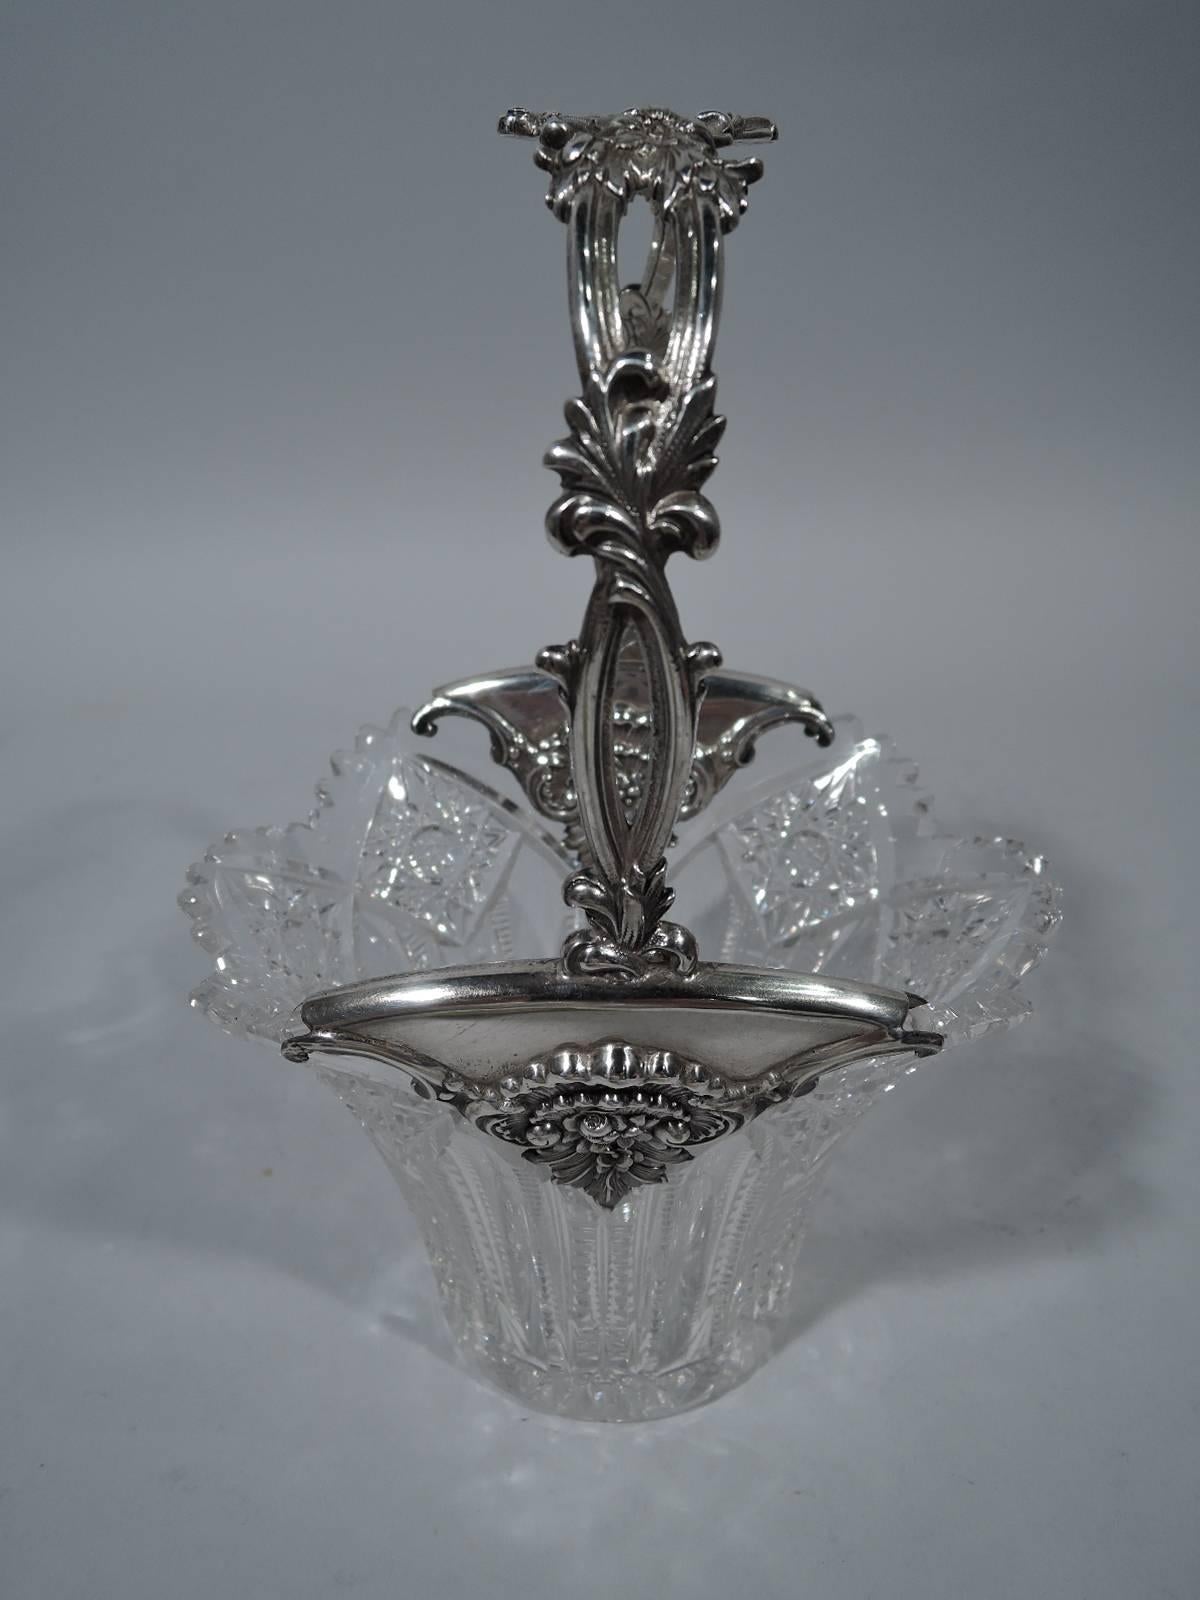 Brilliant-cut-glass basket with sterling silver mounts and handle. Made by Tiffany & Co. in New York, circa 1900. Circular well with tapering sides and ovalish mouth. Ornament includes flutes, notches, and stars. Scalloped rim. Mounts triangular